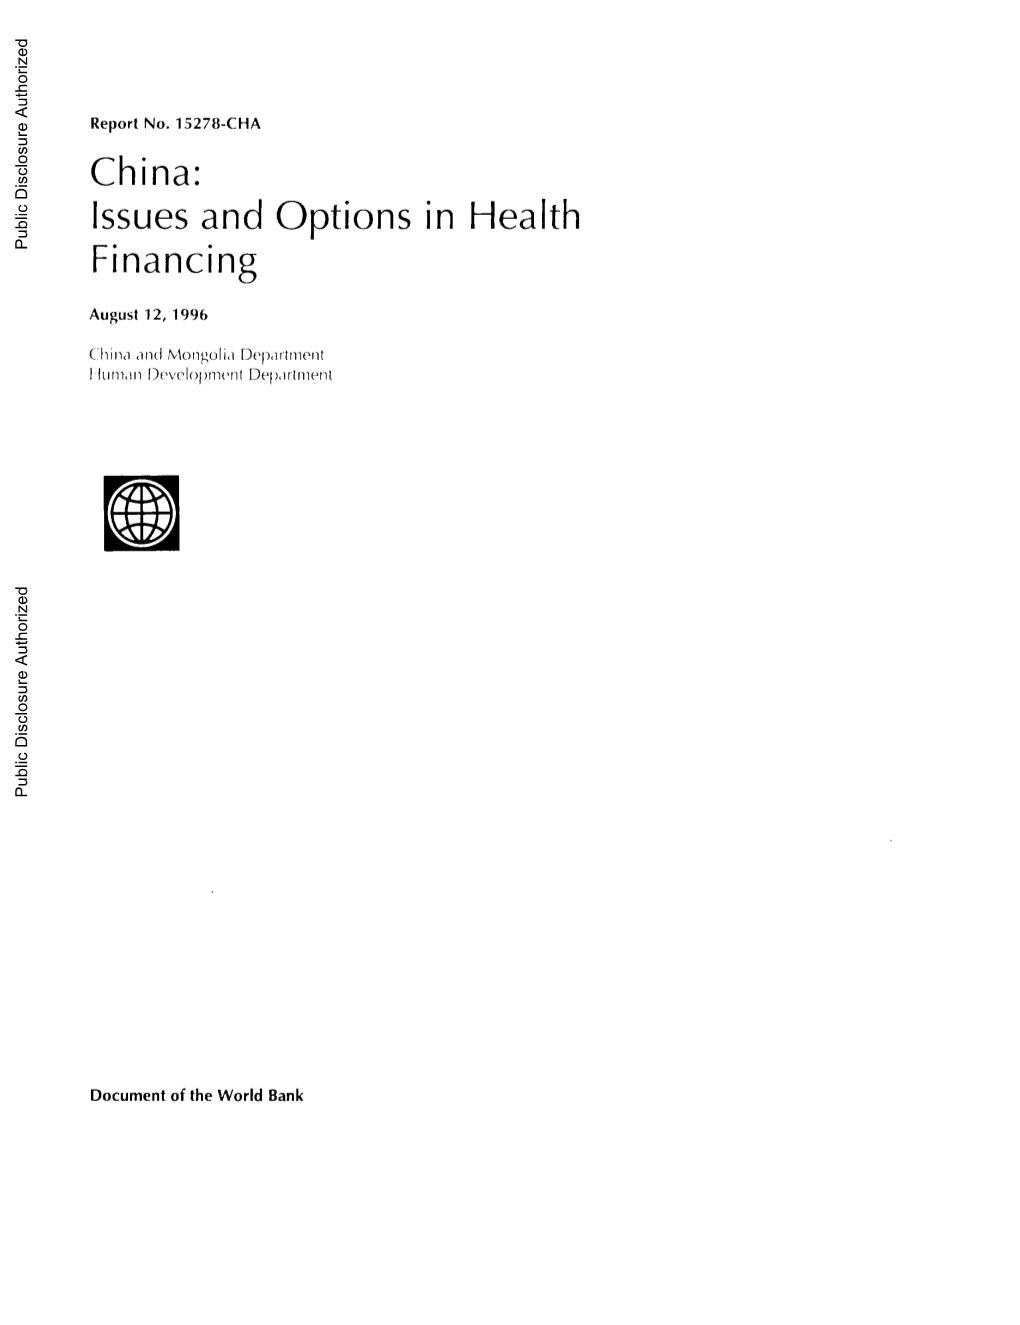 China: Issues and Options in Health Financing